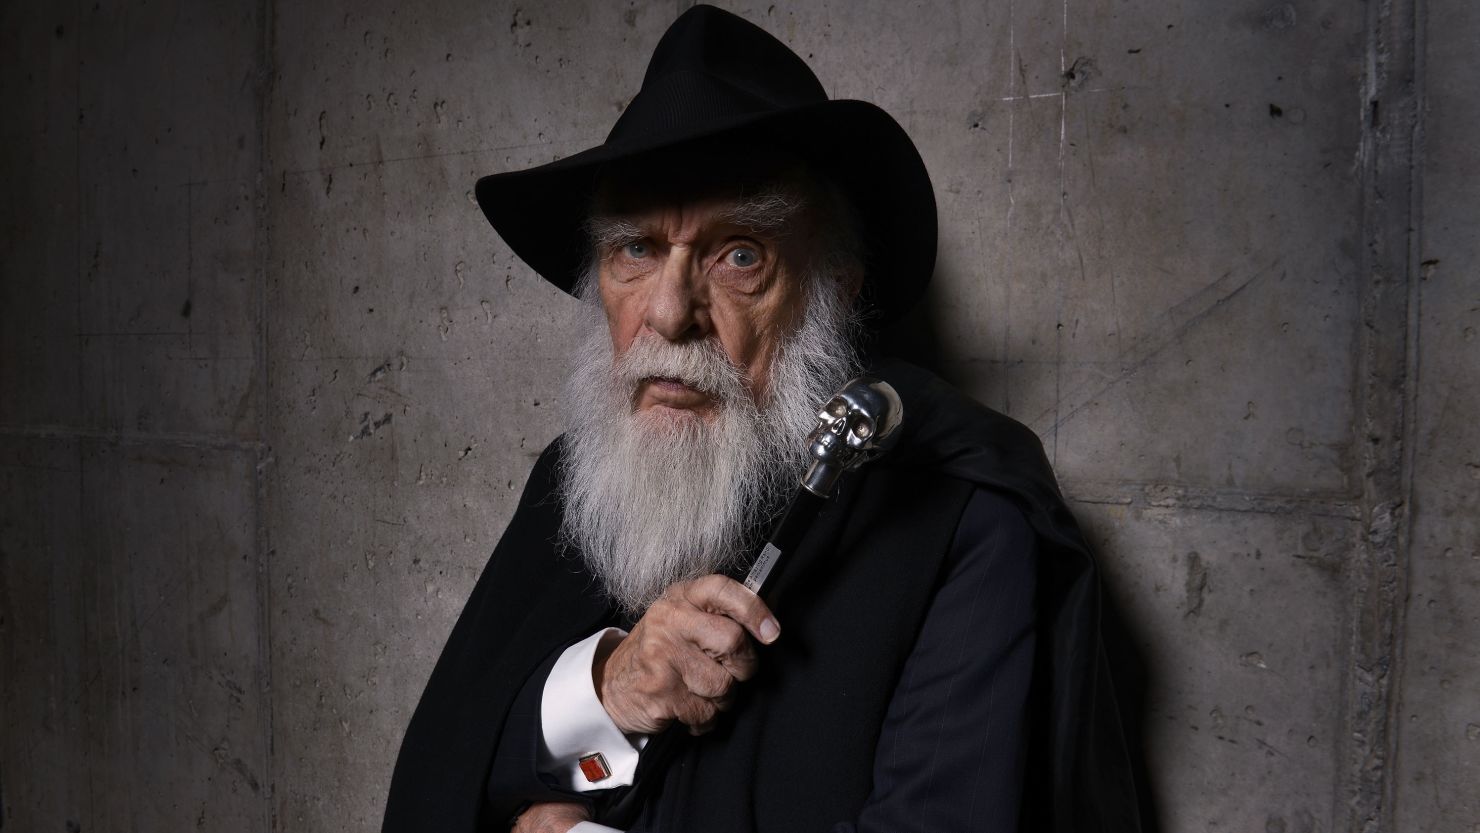 James "The Amazing" Randi has died at age 92, according to his educational foundation. He made a name for himself as an escape artist and later as a skeptic who challenged magicians who deceived the public.